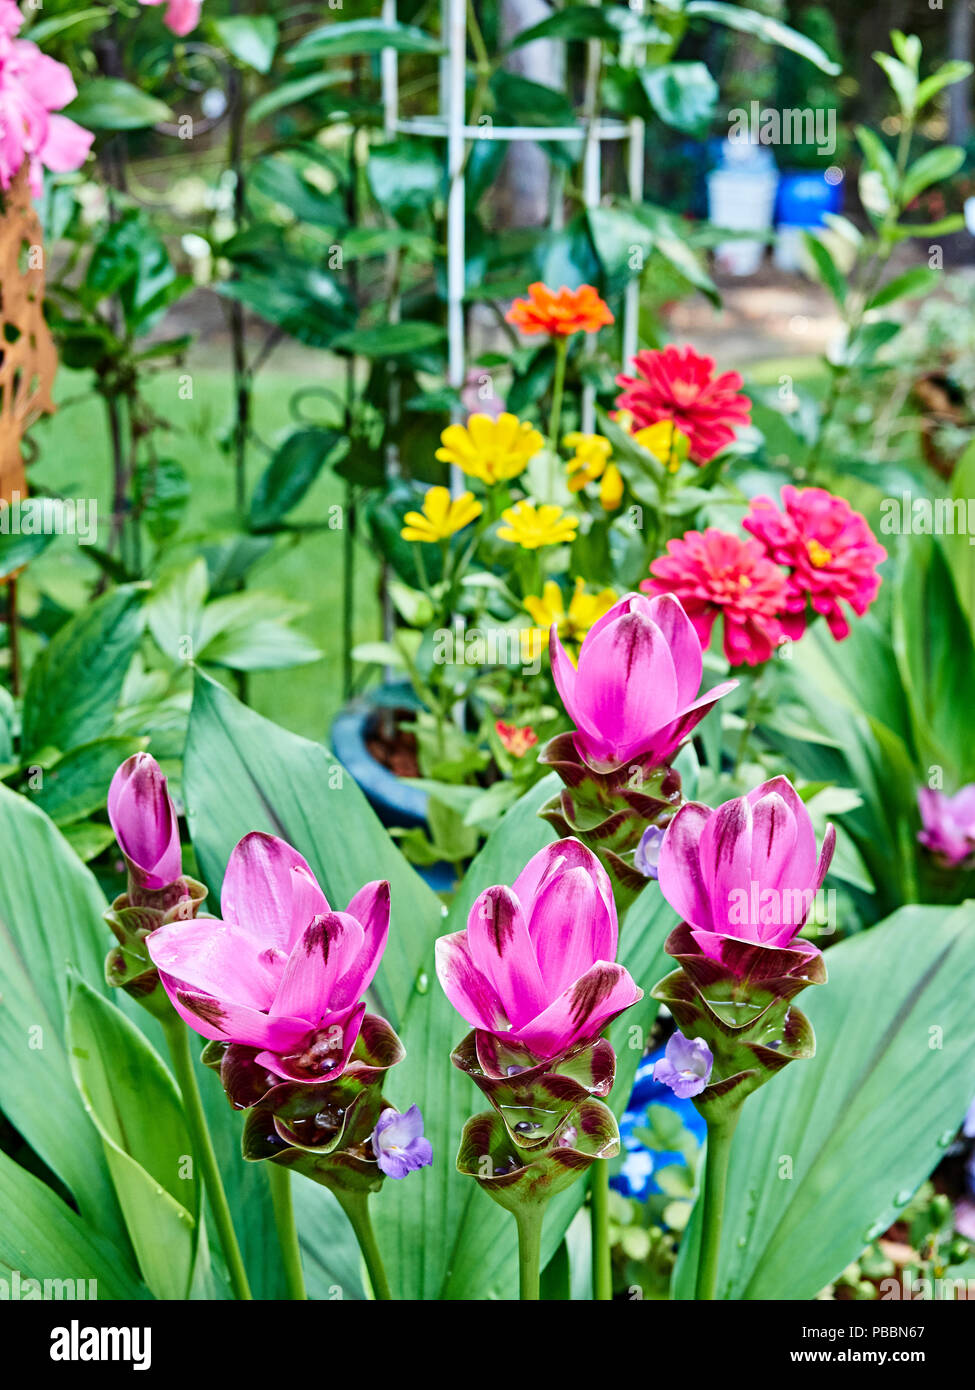 Flowering Curcuma Alismatifolia plant also known as turmeric or Siam Tulip or summer tulip blooming in a patio garden. Stock Photo